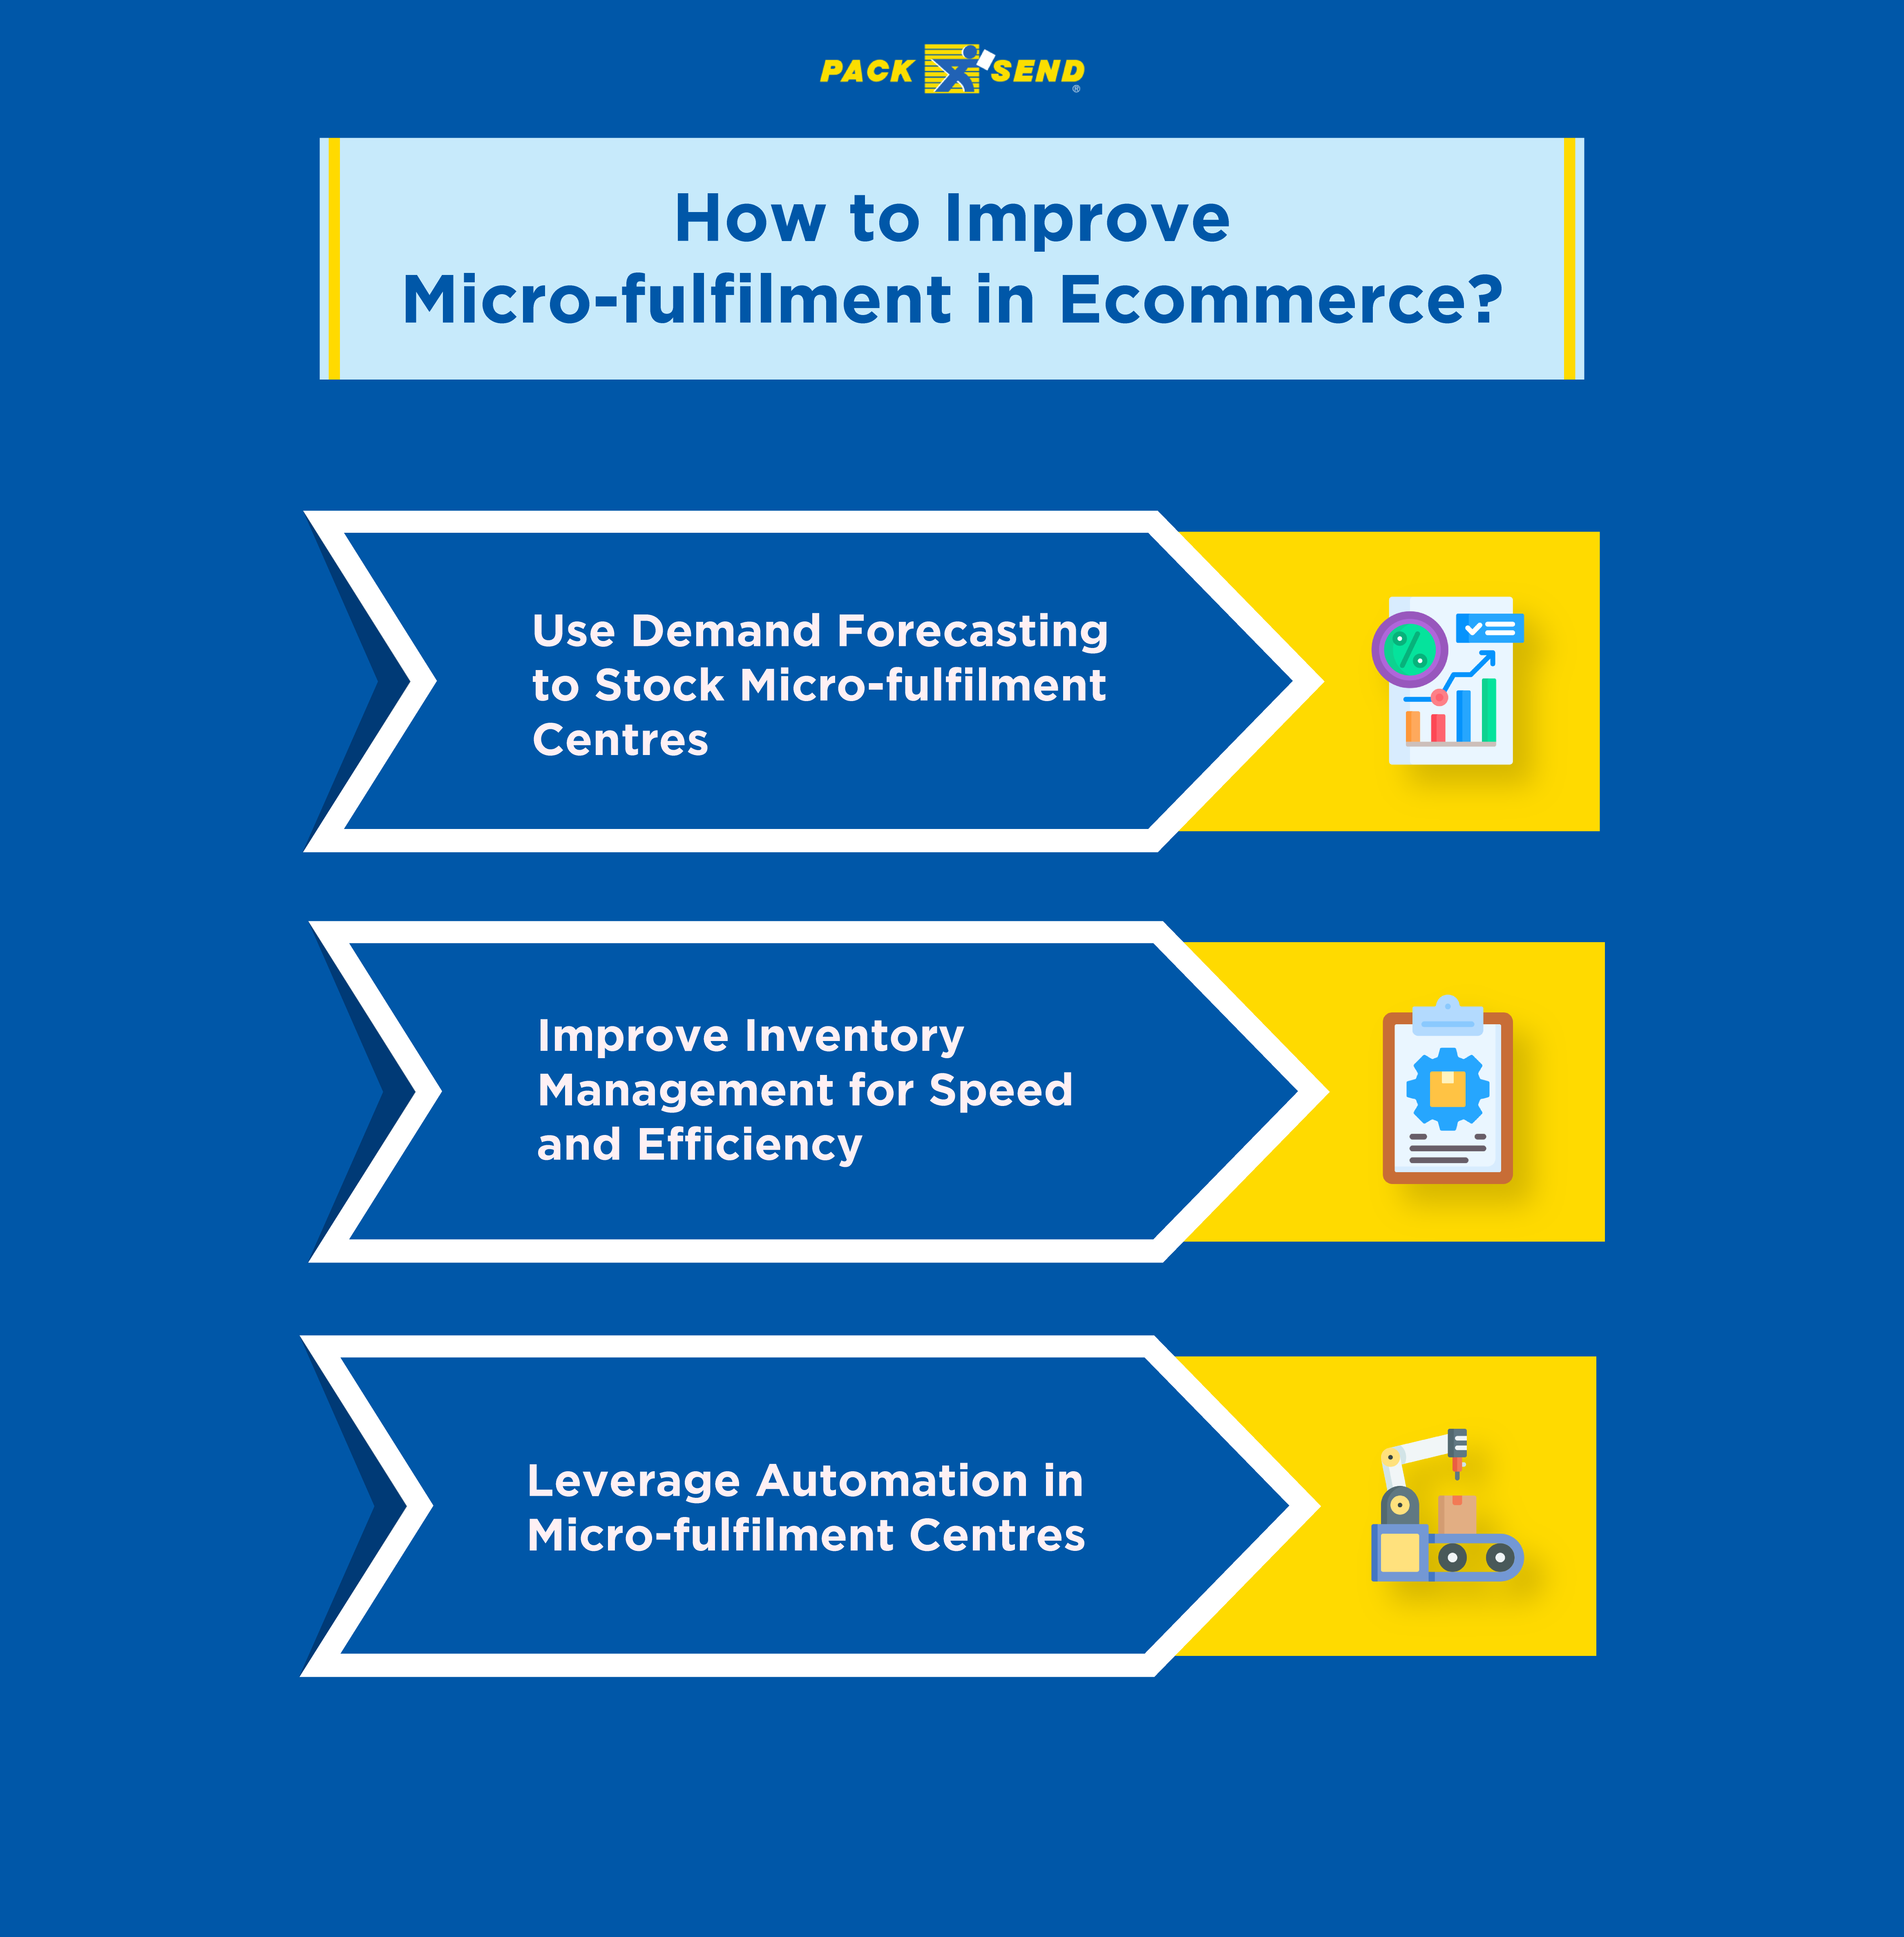 Tips to improve micro-fulfilment in ecommerce